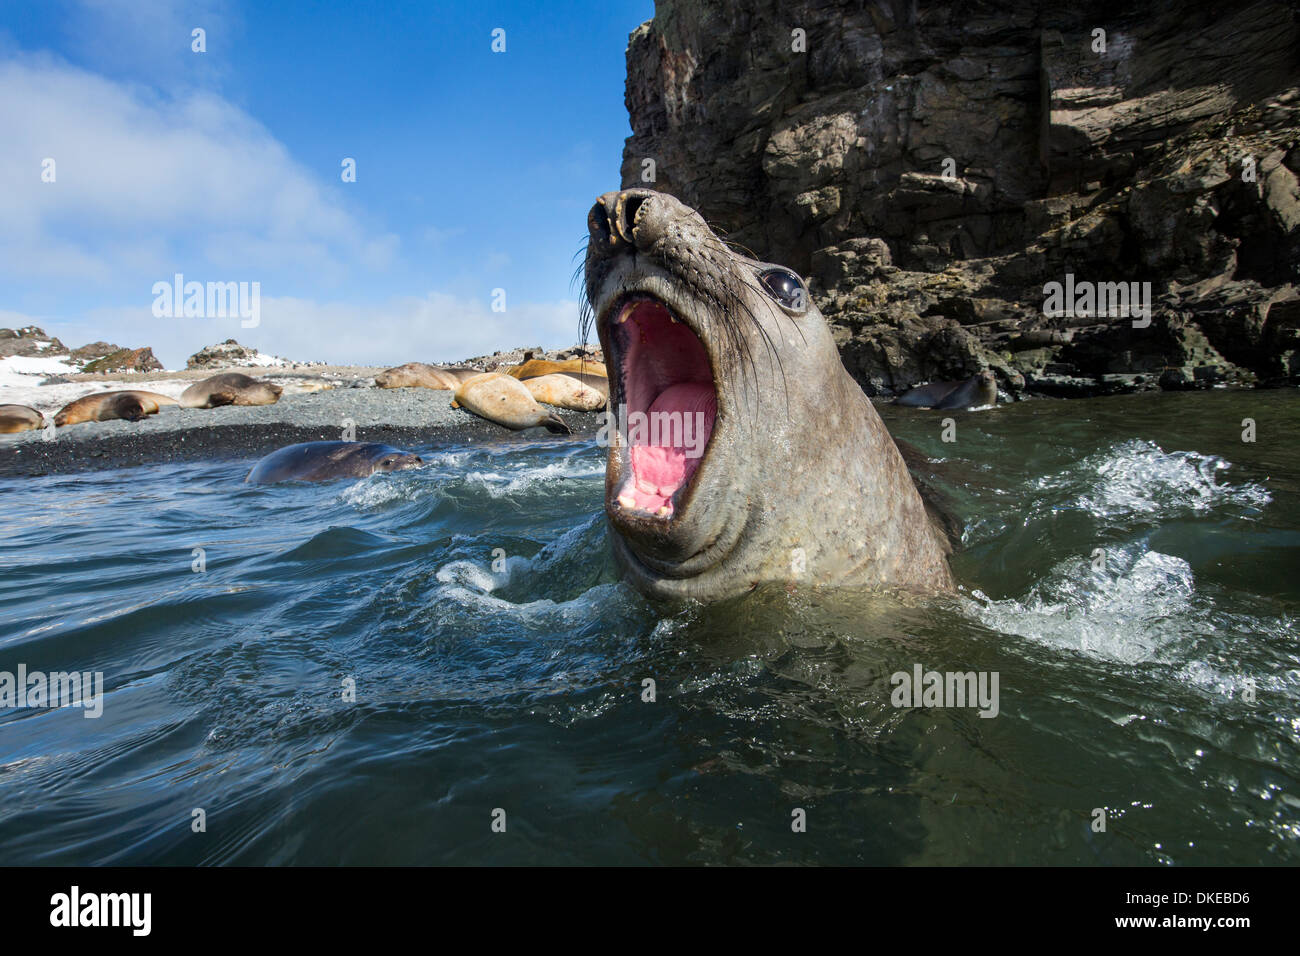 Antarctica, Elephant Seal (Mirounga leonina) opens mouth while bellowing in shallows by Livingstone Island Stock Photo